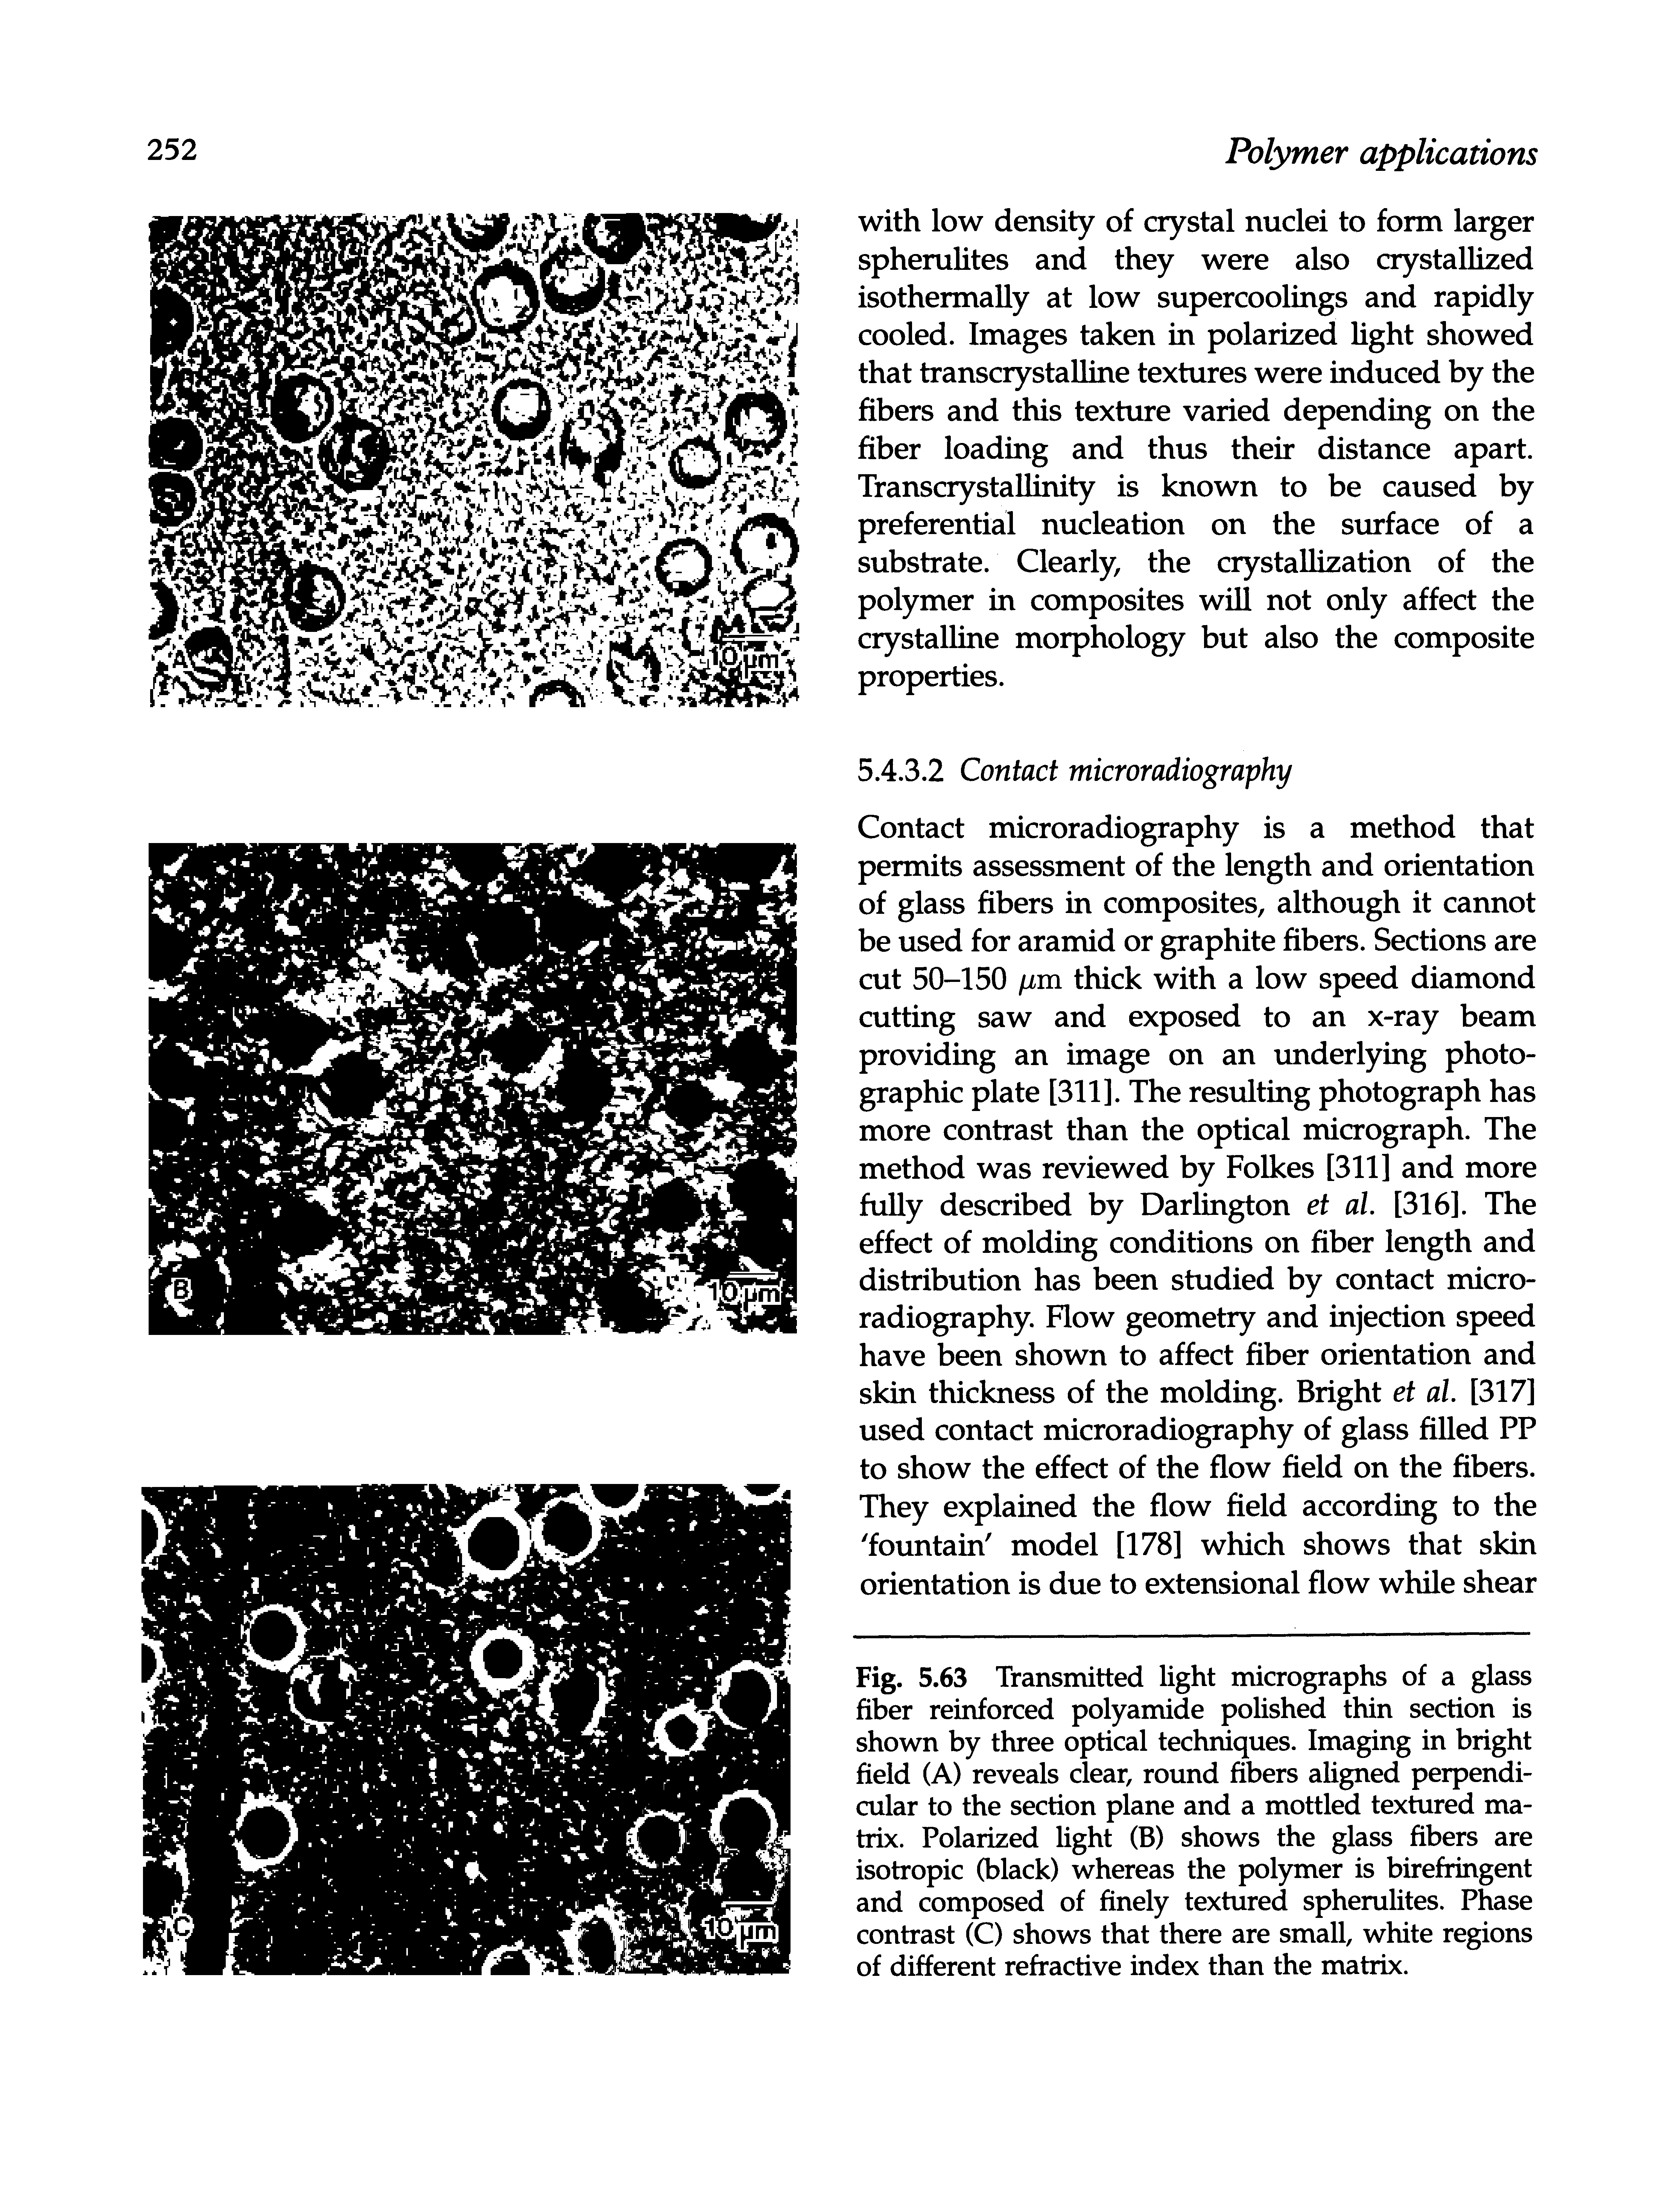 Fig. 5.63 Transmitted light micrographs of a glass fiber reinforced polyamide polished thin section is shown by three optical techniques. Imaging in bright field (A) reveals clear, round fibers aligned perpendicular to the section plane and a mottled textured matrix. Polarized light (B) shows the glass fibers are isotropic (black) whereas the polymer is birefringent and composed of finely textured spherulites. Phase contrast (C) shows that there are small, white regions of different refractive index than the matrix.